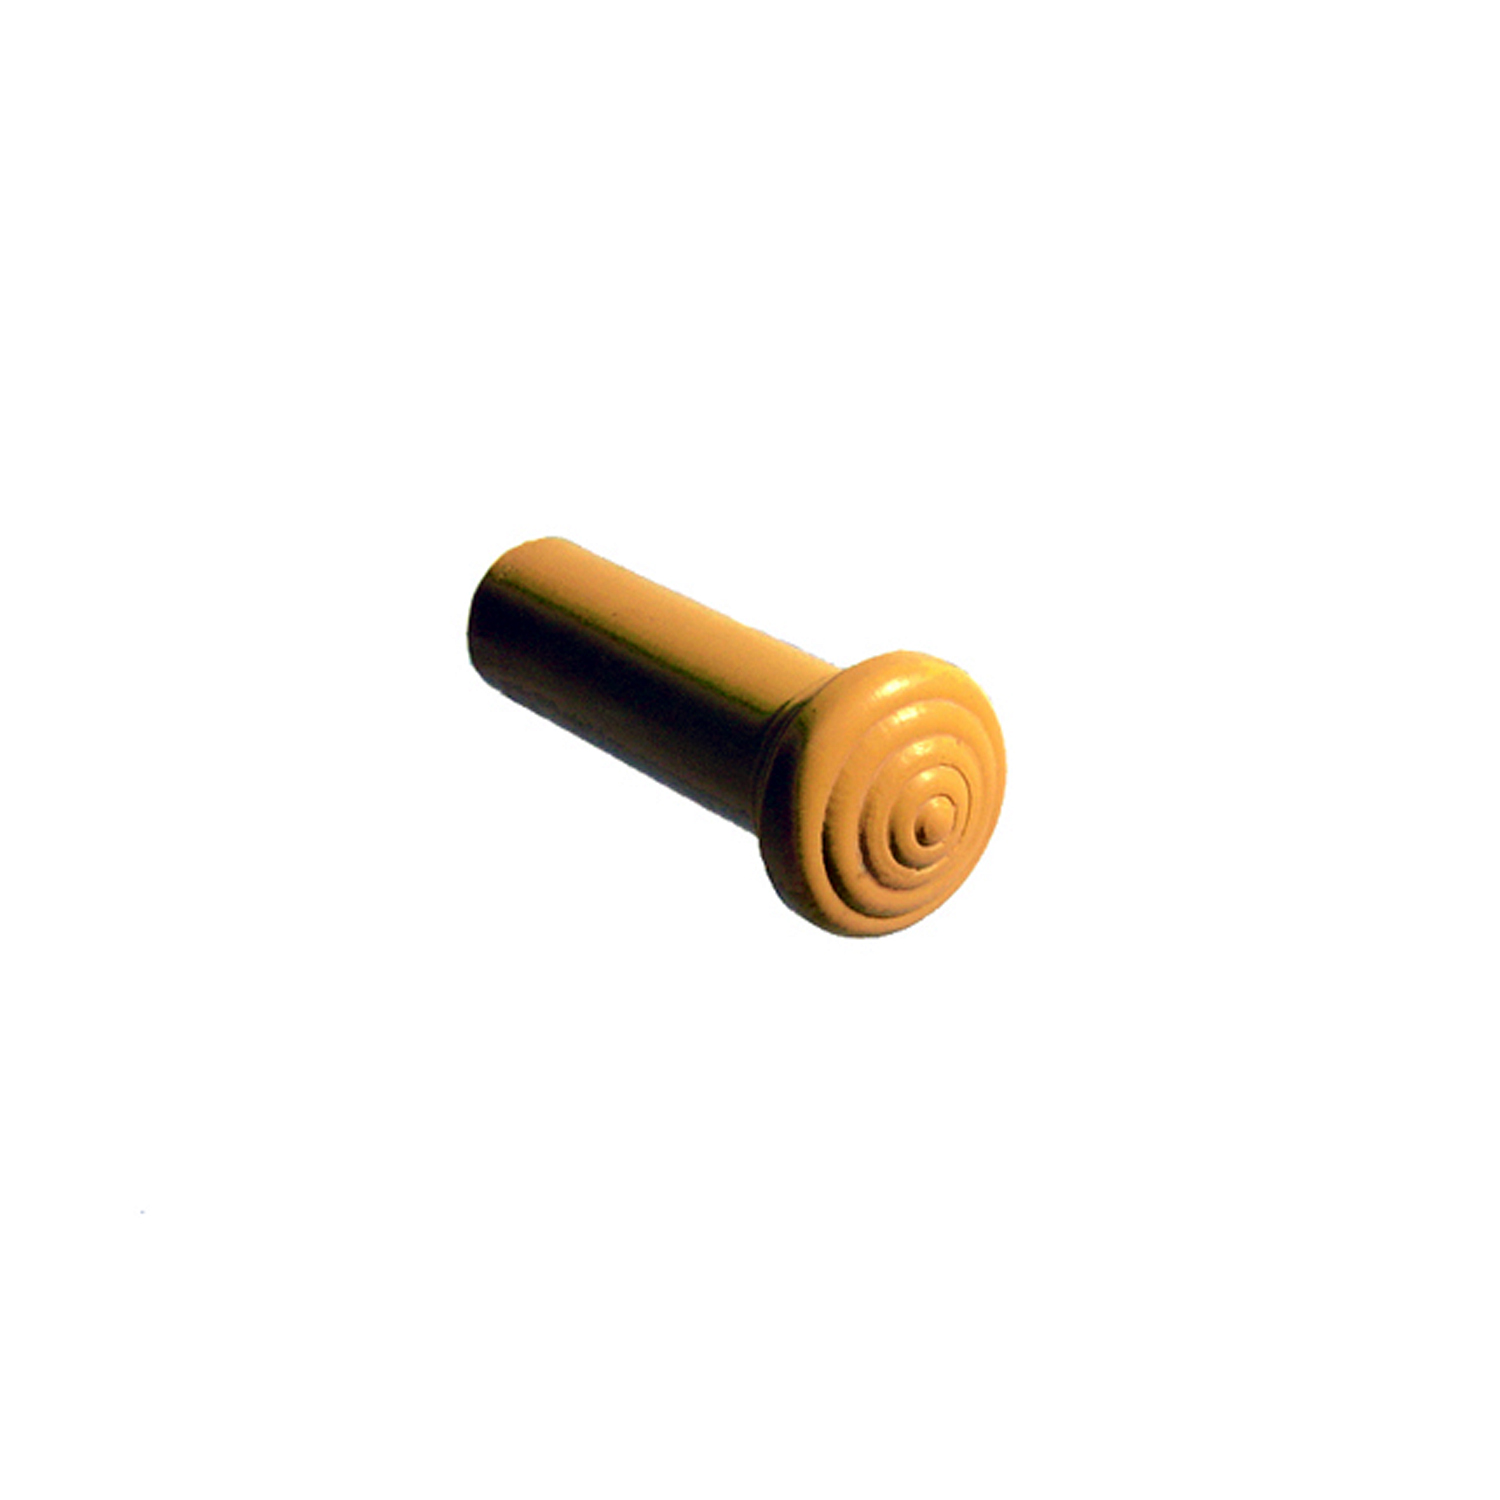 1941 Cadillac Series 60 Door Lock Knob.  Made of Yellow rubber, self-threading-RP 304-H